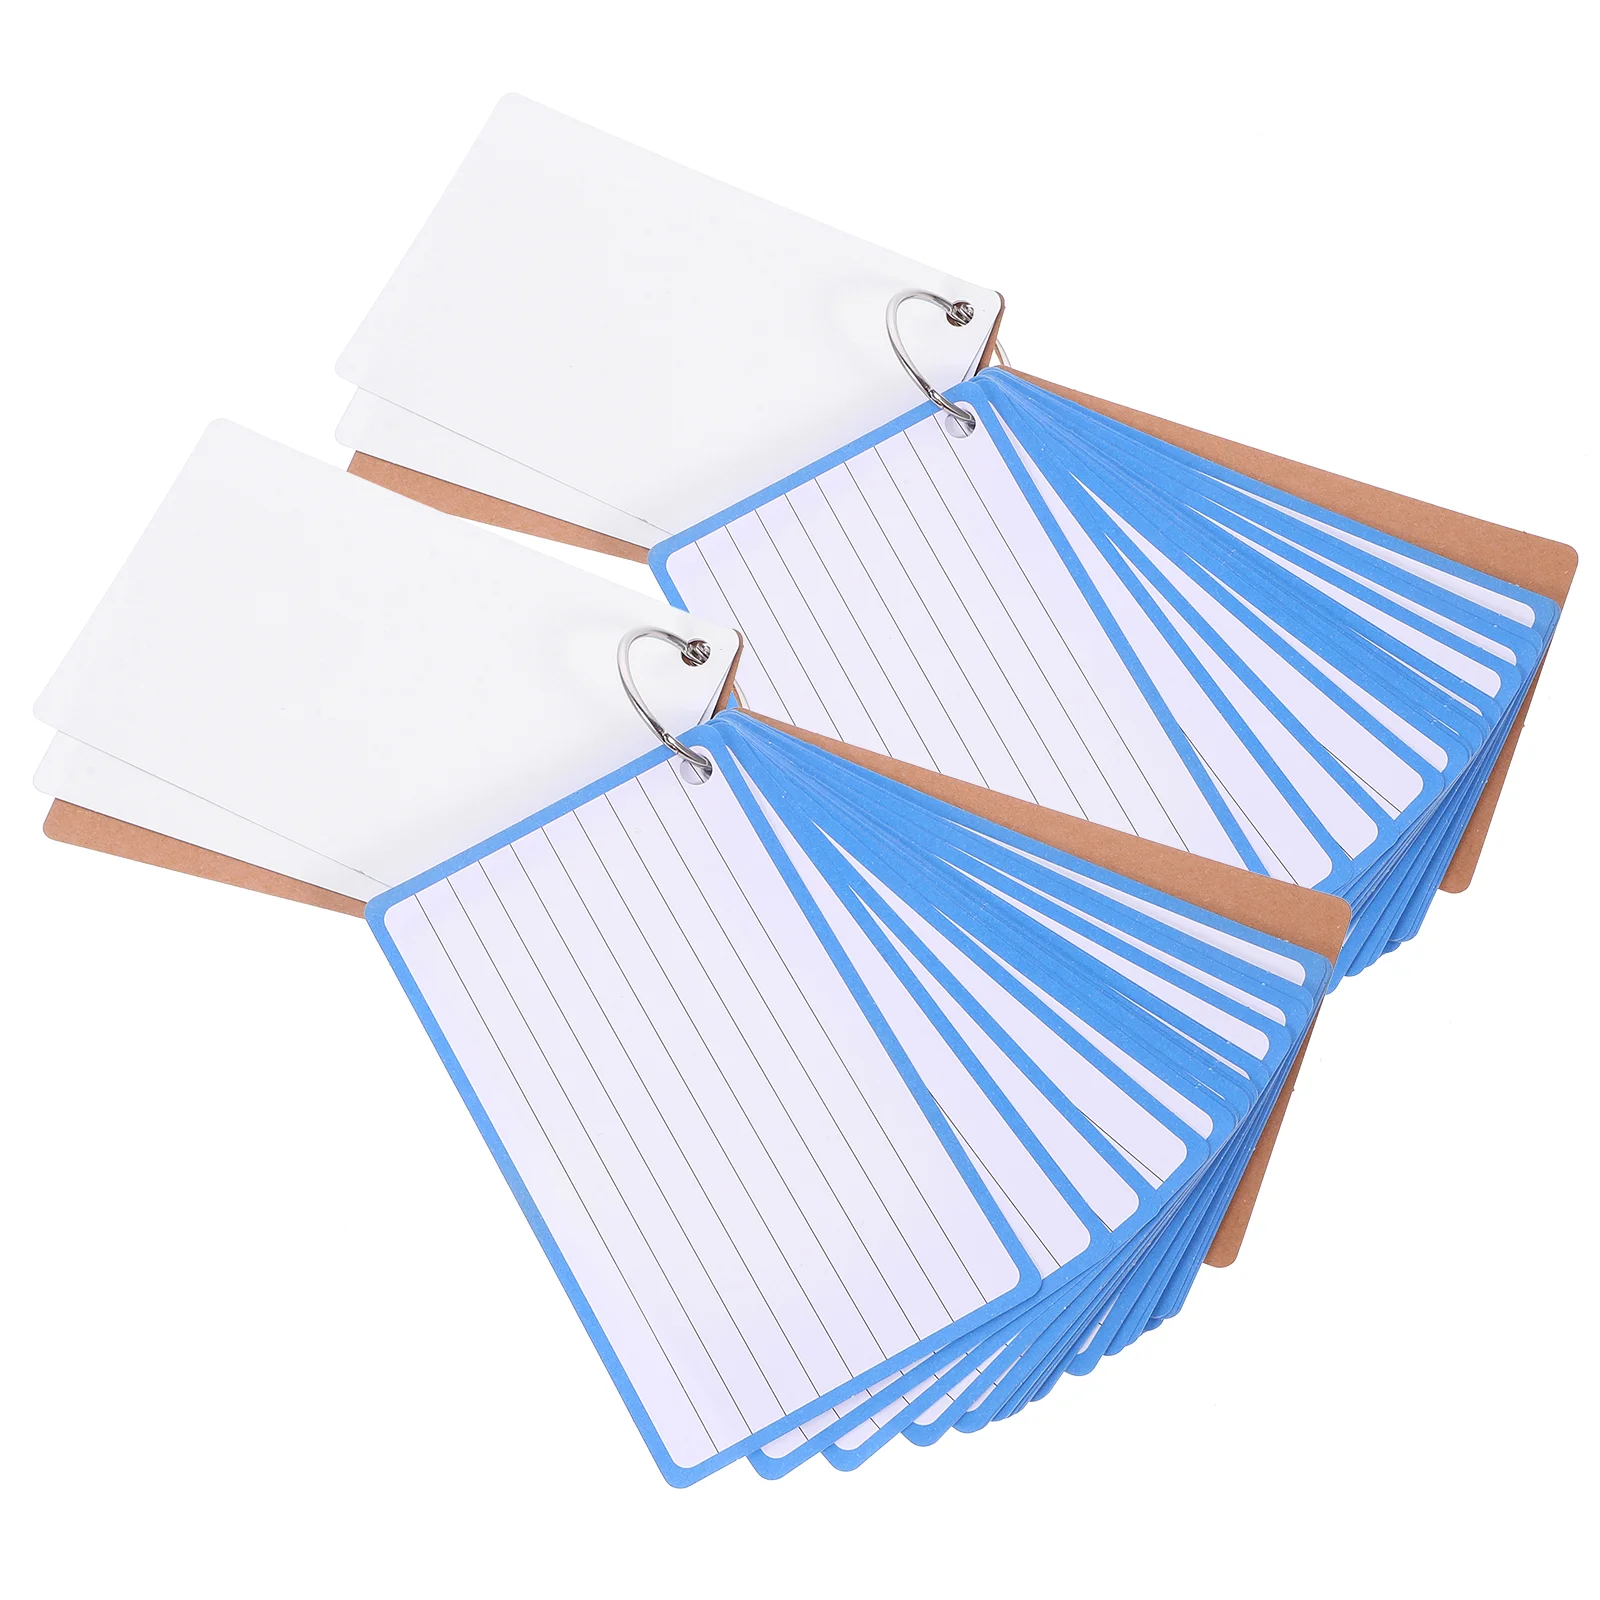 2 Books of Lined Flash Cards Colorful Flash Cards Blank Colored Card Index Cards for Office